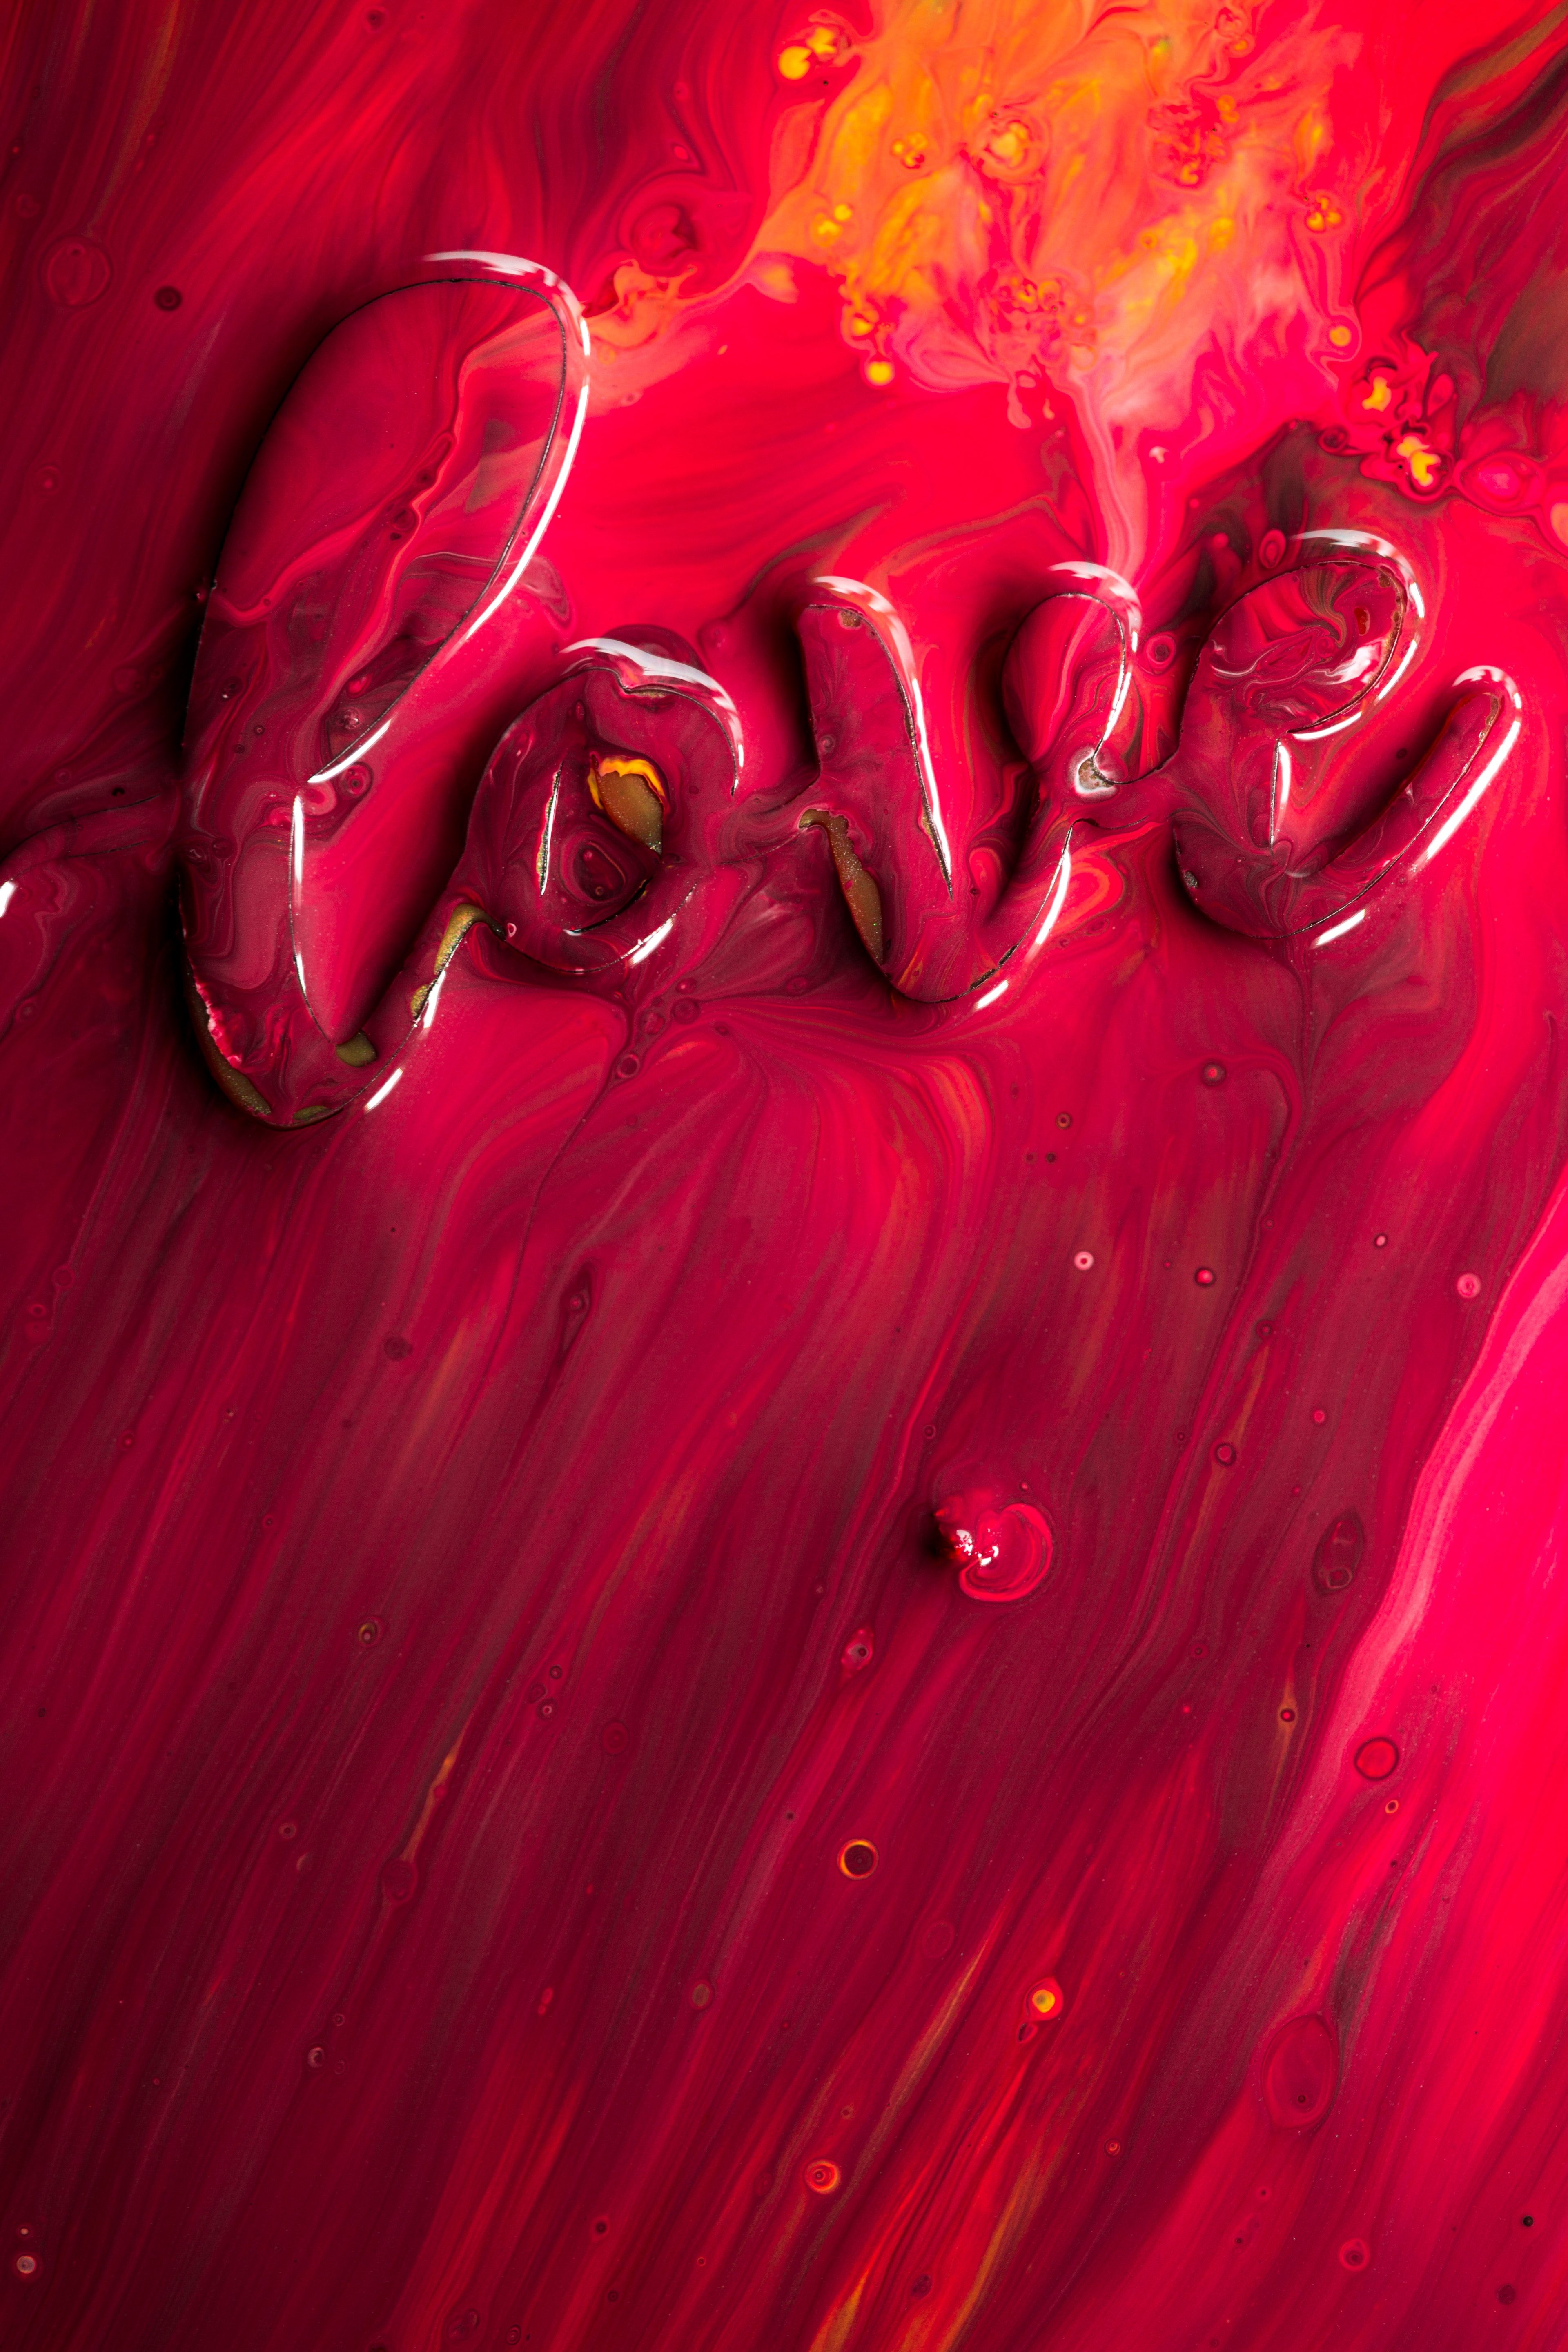 Love Wallpaper 4K, Food, Red, Creamy, text, Aesthetic, Love